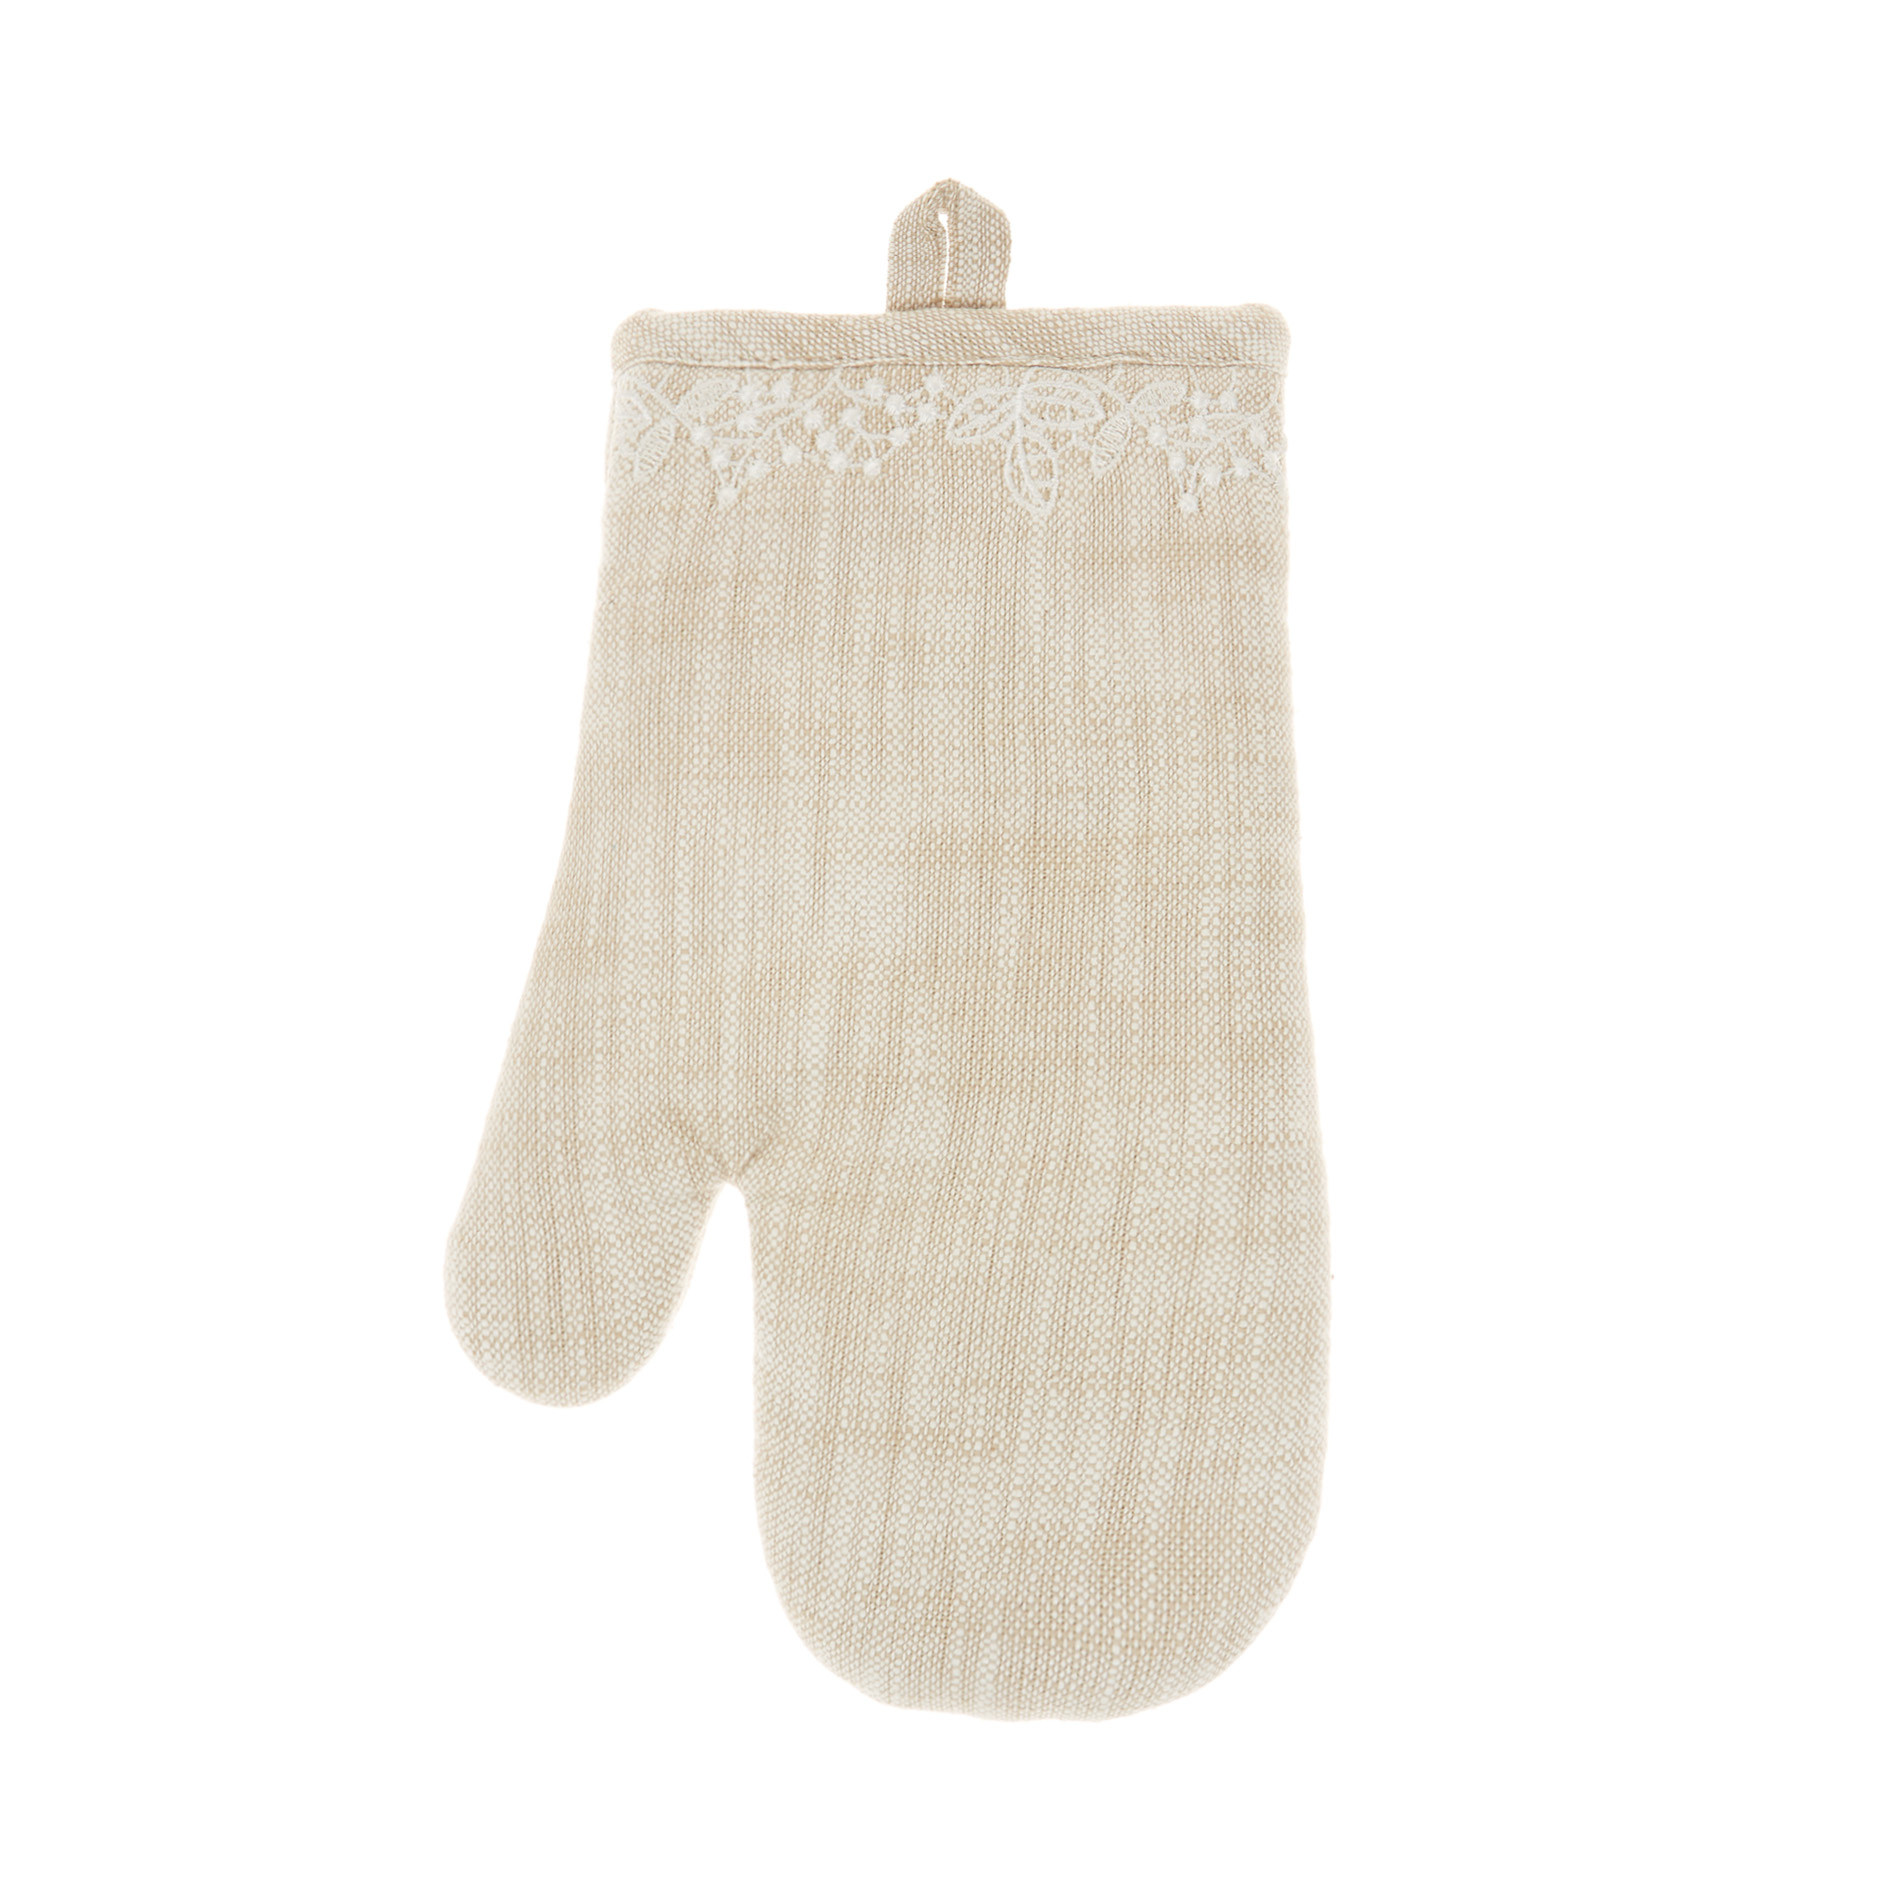 100% iridescent cotton oven mitt with embroidery, Light Beige, large image number 0